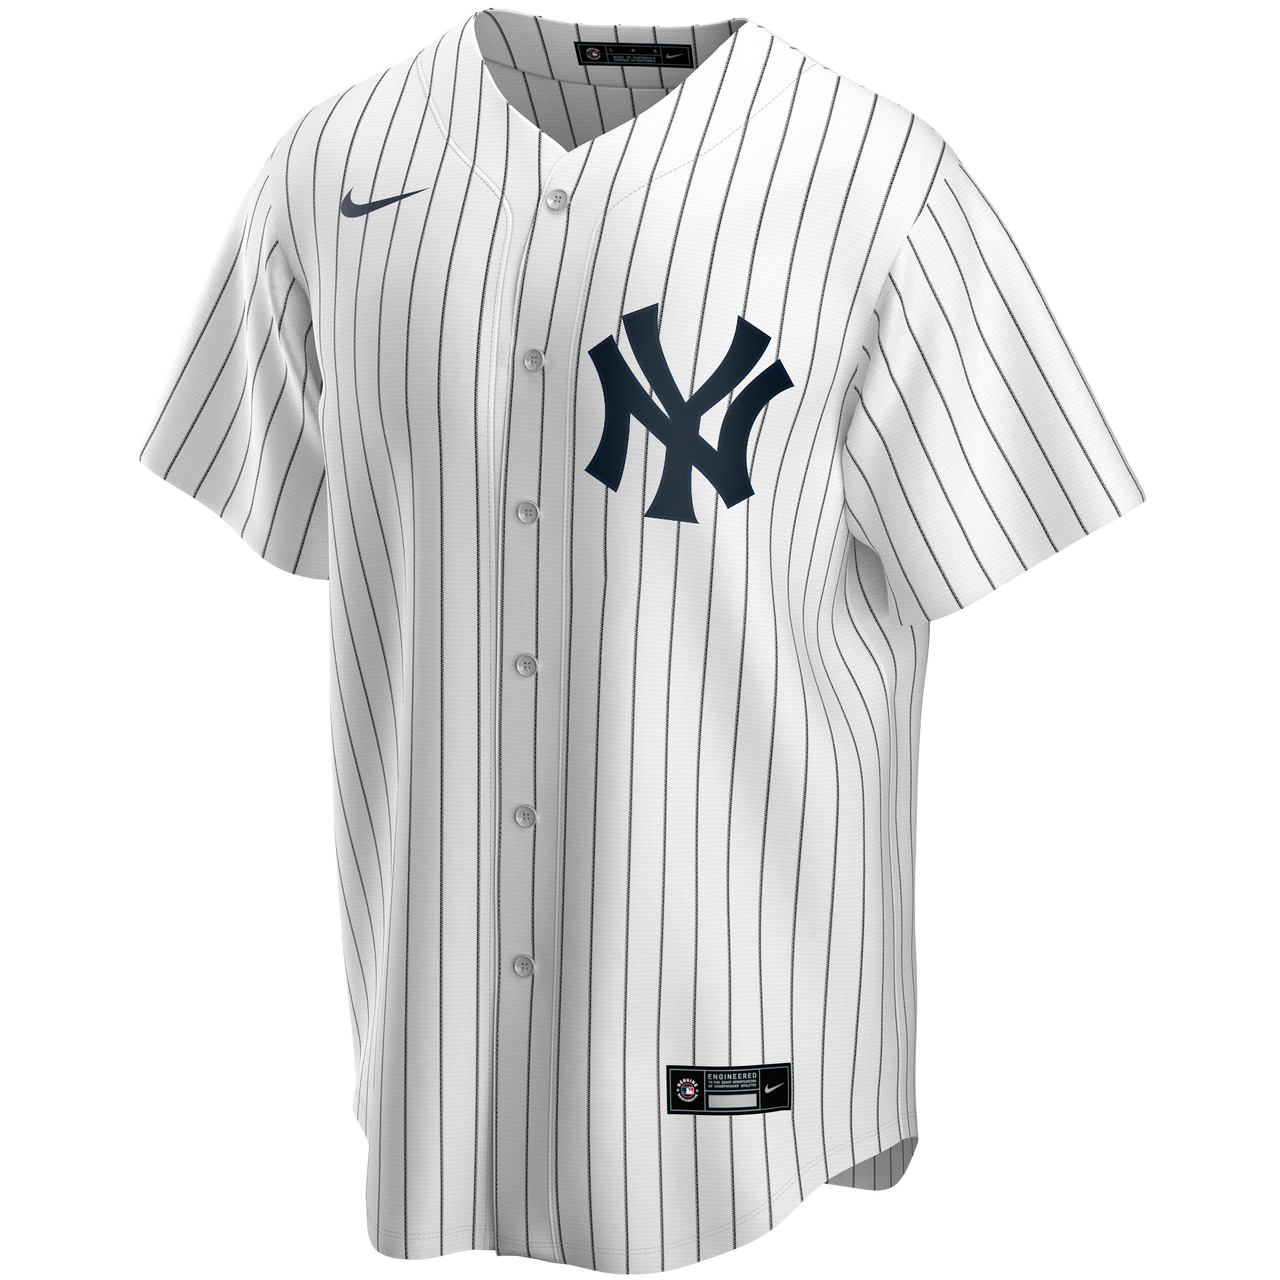 NY Yankees Replica Personalized Youth Home Jersey